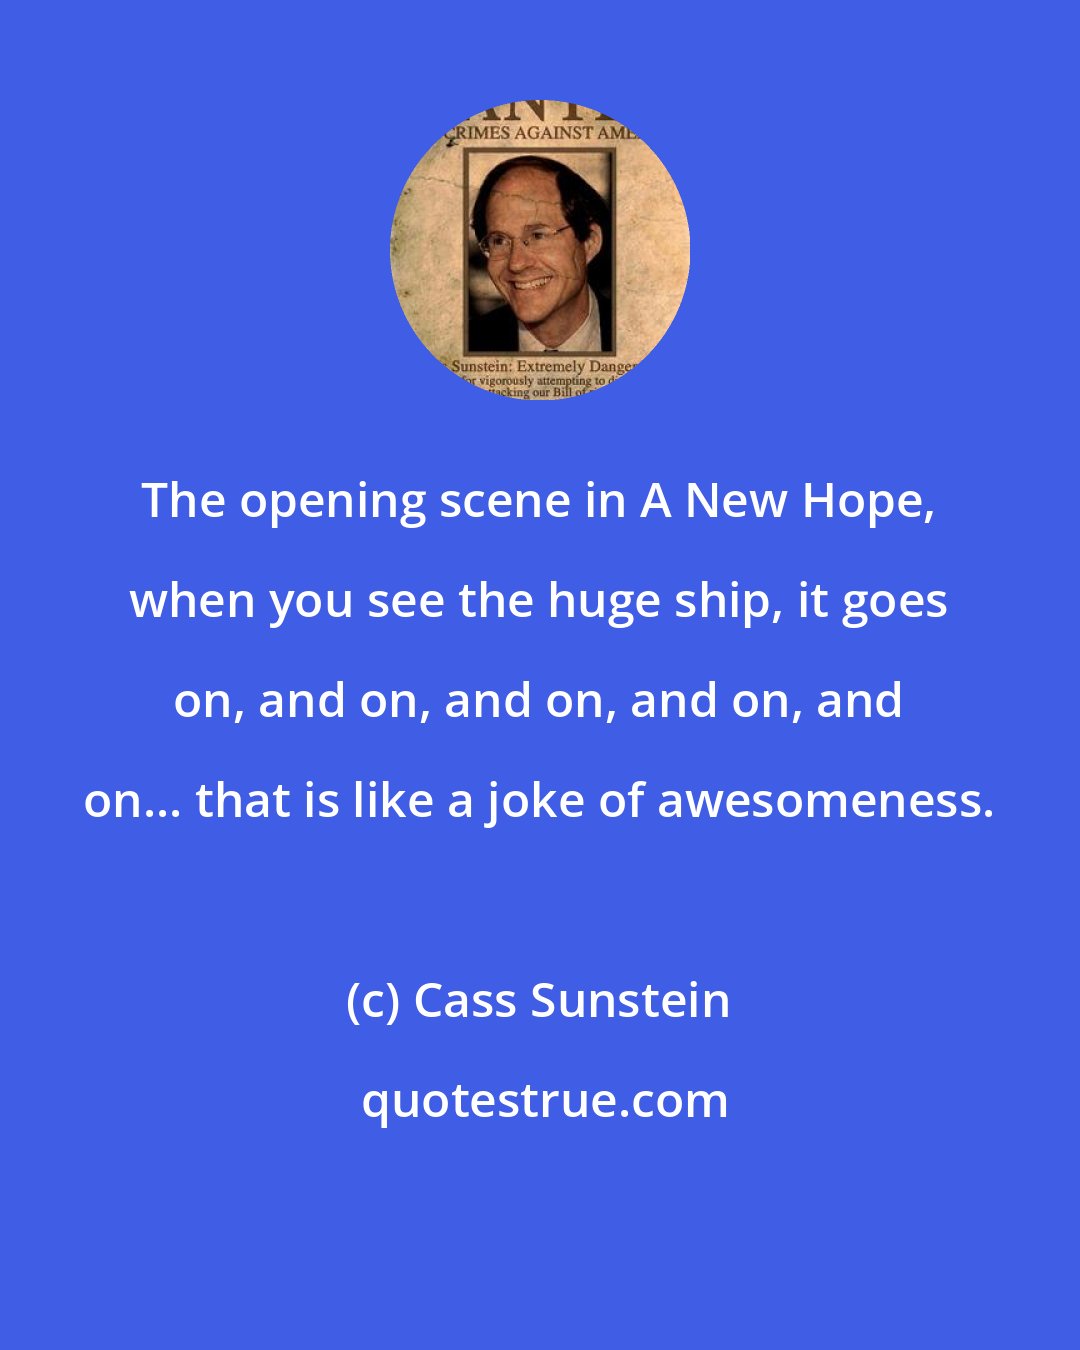 Cass Sunstein: The opening scene in A New Hope, when you see the huge ship, it goes on, and on, and on, and on, and on... that is like a joke of awesomeness.